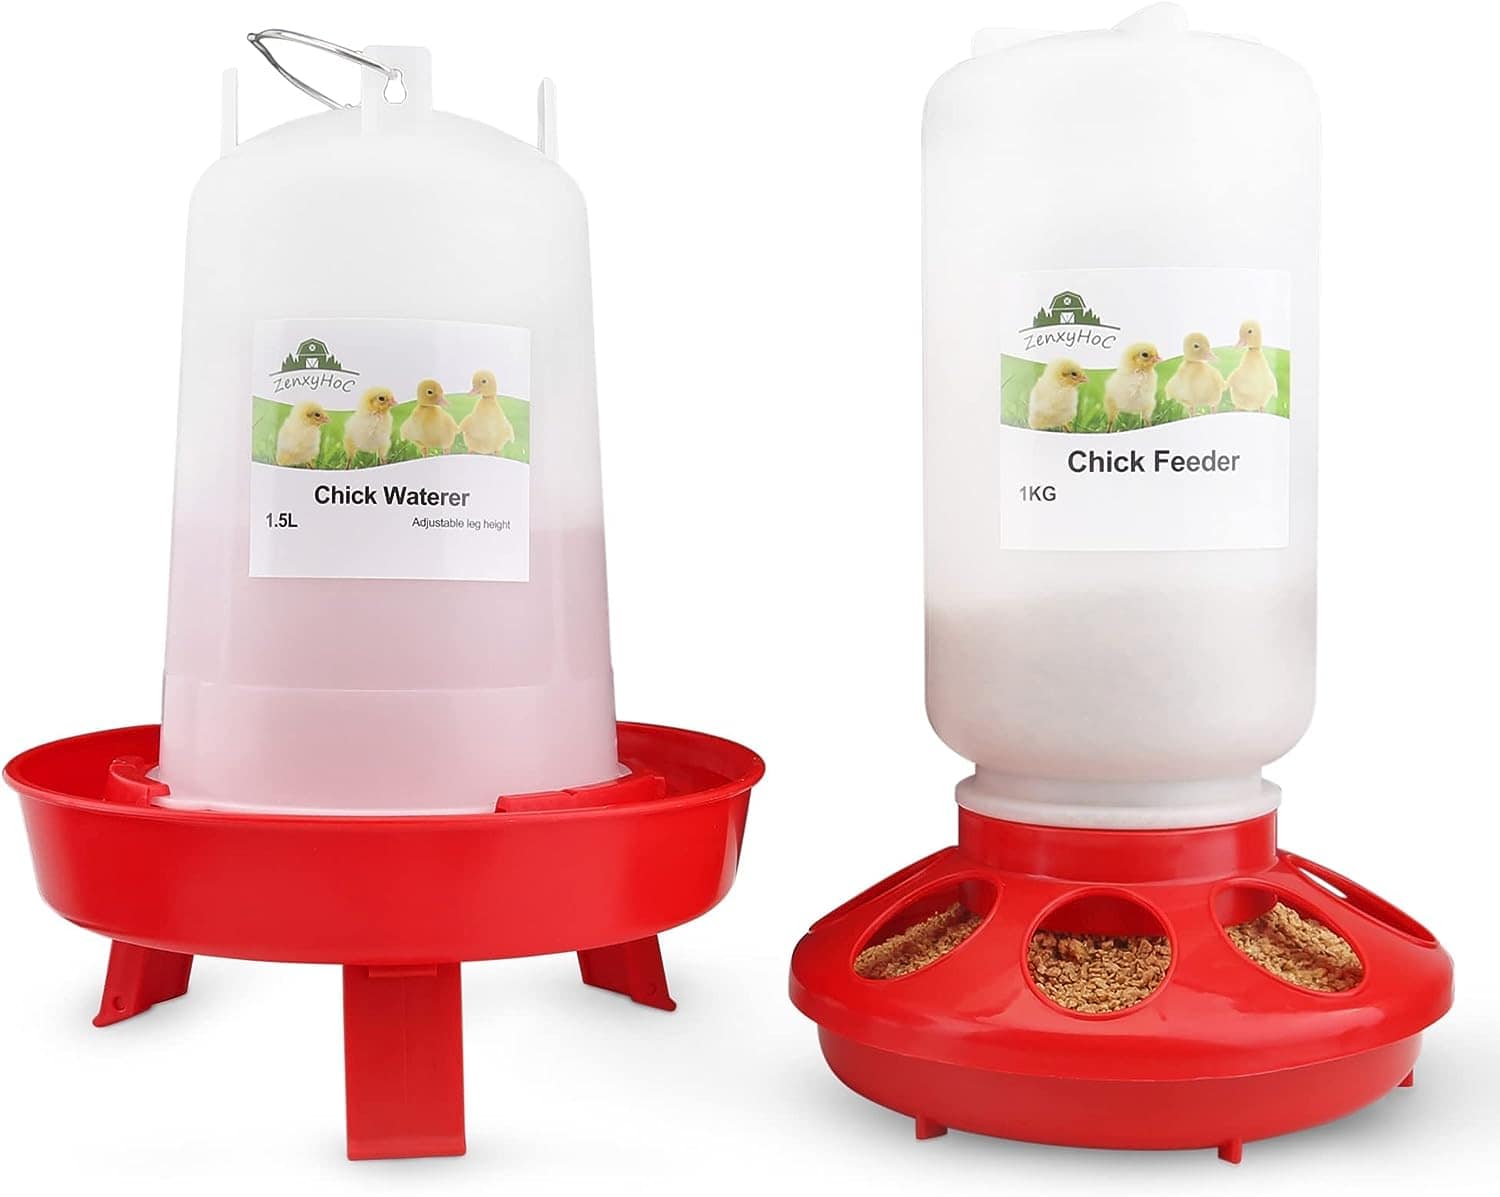 ZenxyHoC 1L Chick Feeder and 1.5L Chick Waterer Kit